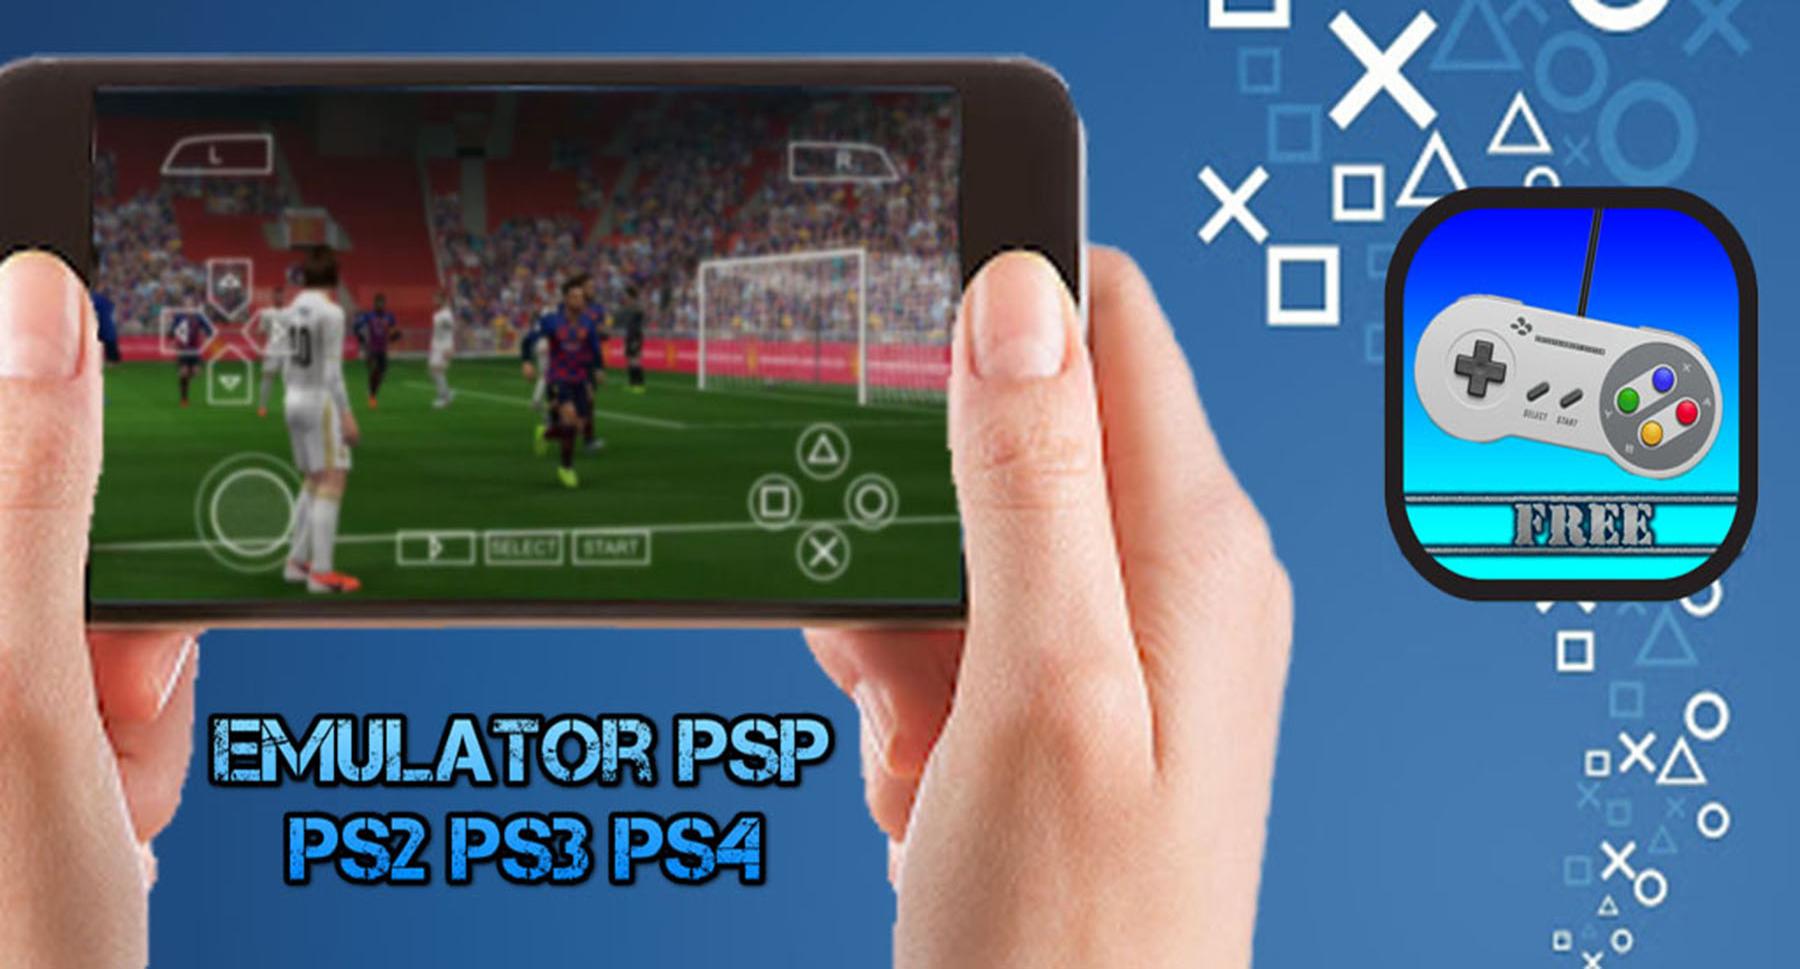 DOWNLOAD & PLAY: Emulator PSP PS2 PS3 PS4 Free for Android - APK Download